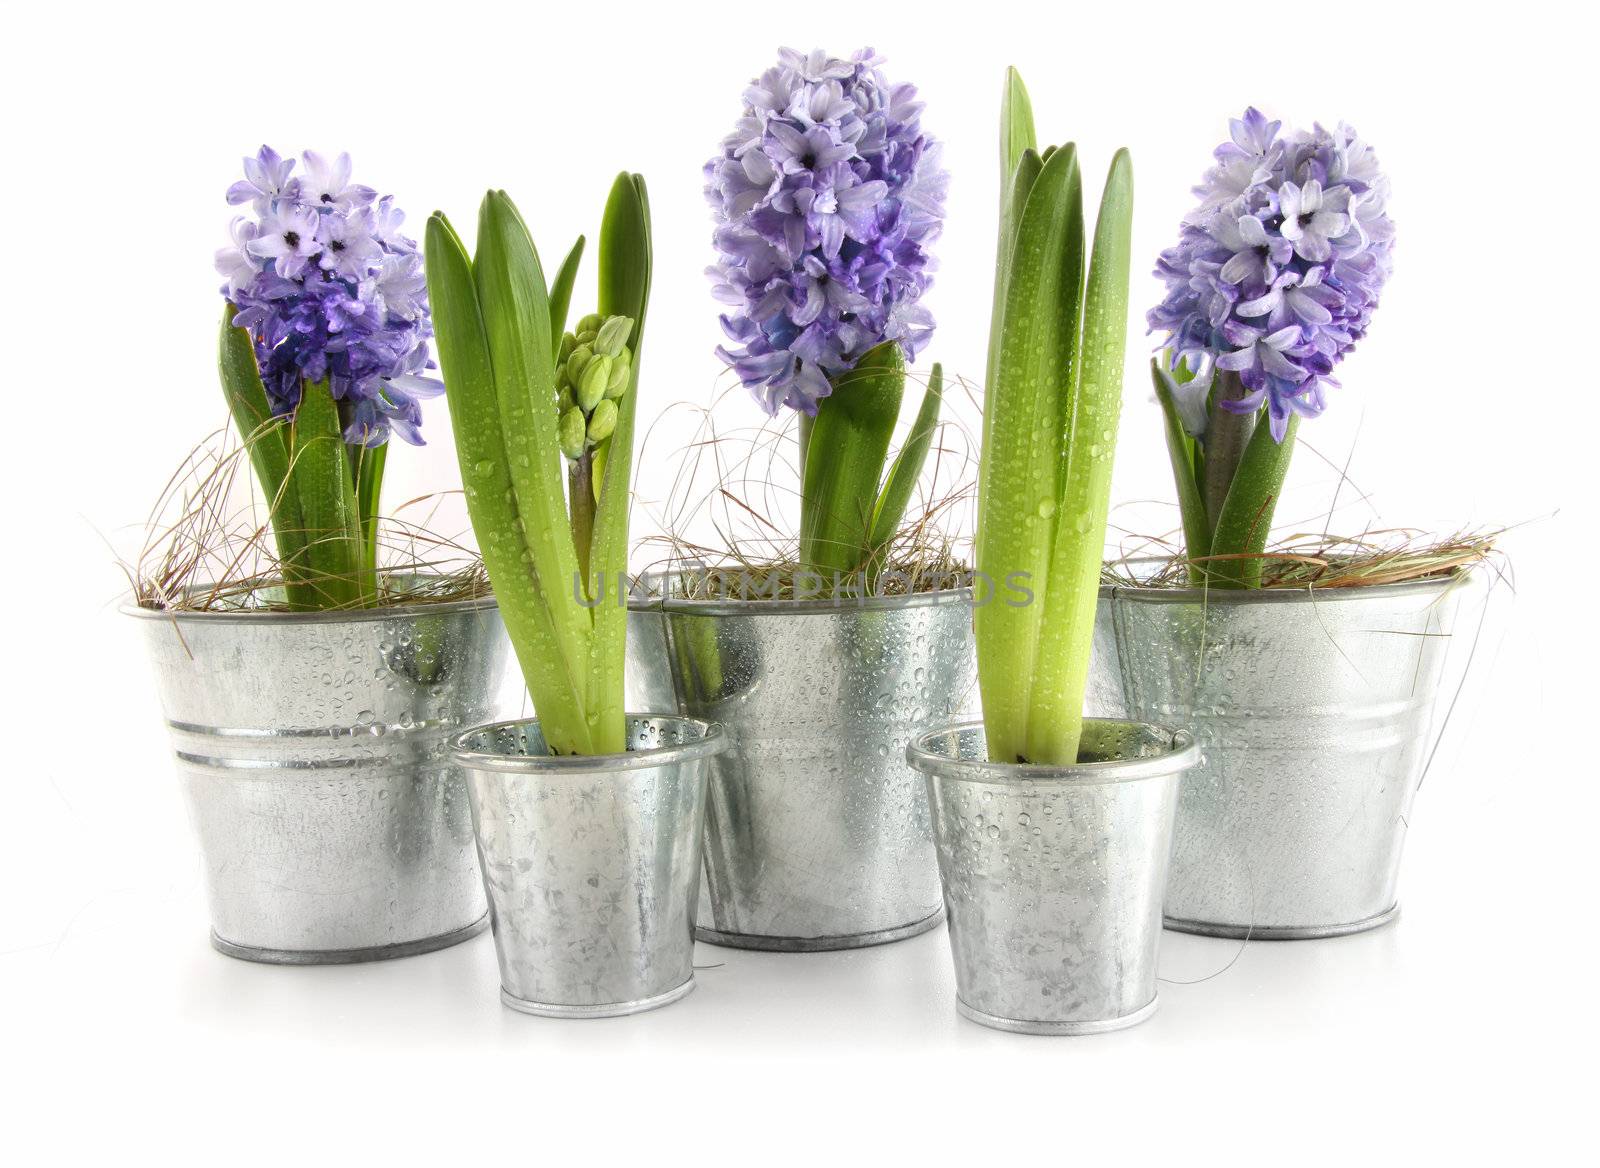 Purple hyacinth in aluminum pots on white by Sandralise